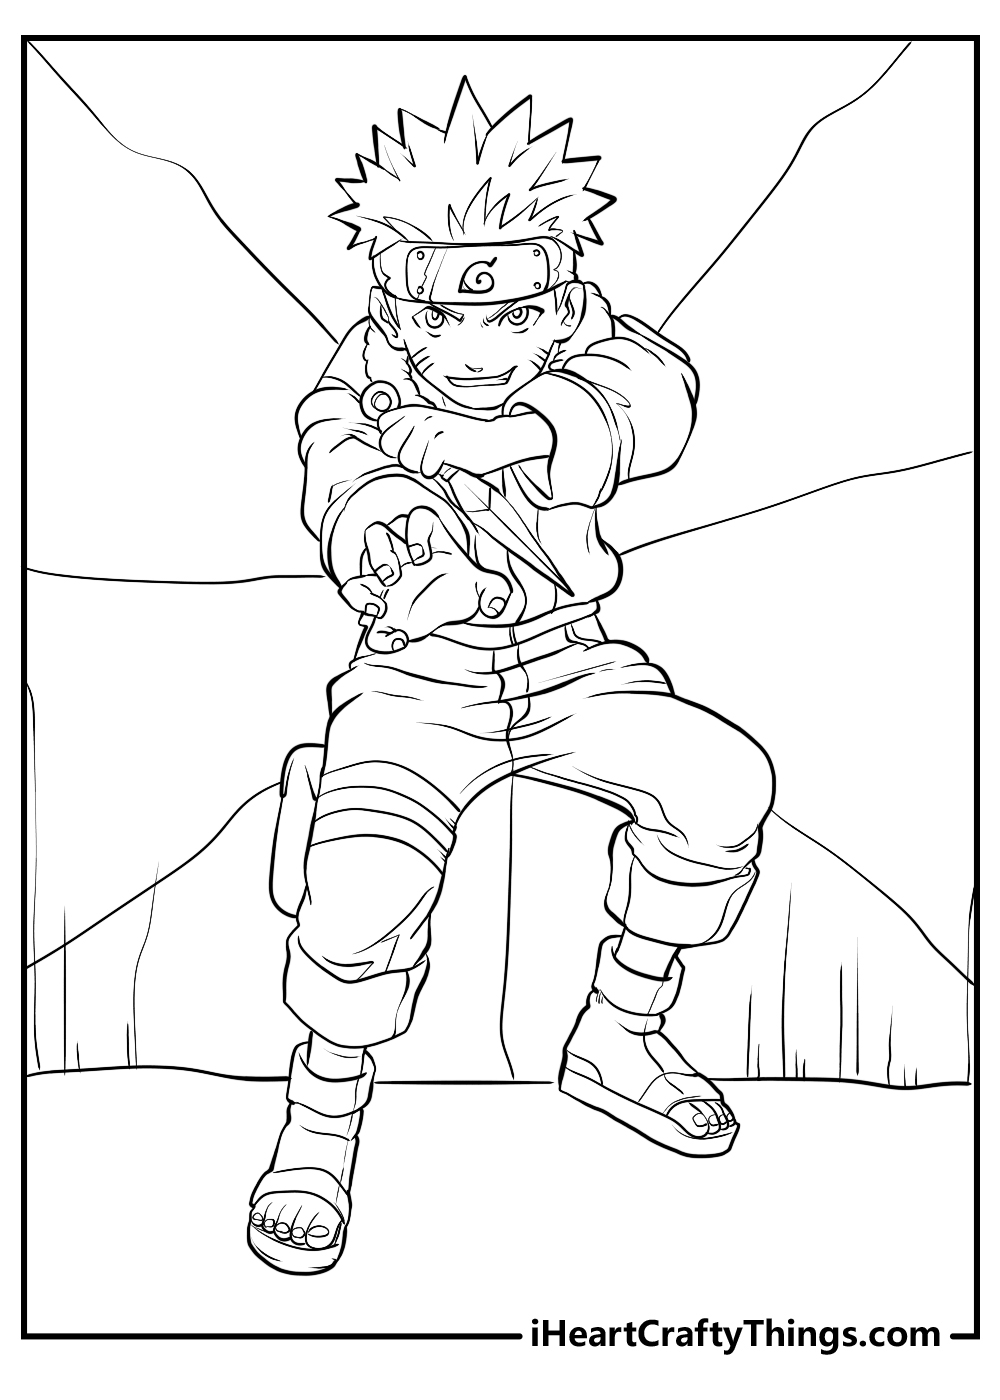 Naruto Printable Coloring Pages - Get Coloring Pages